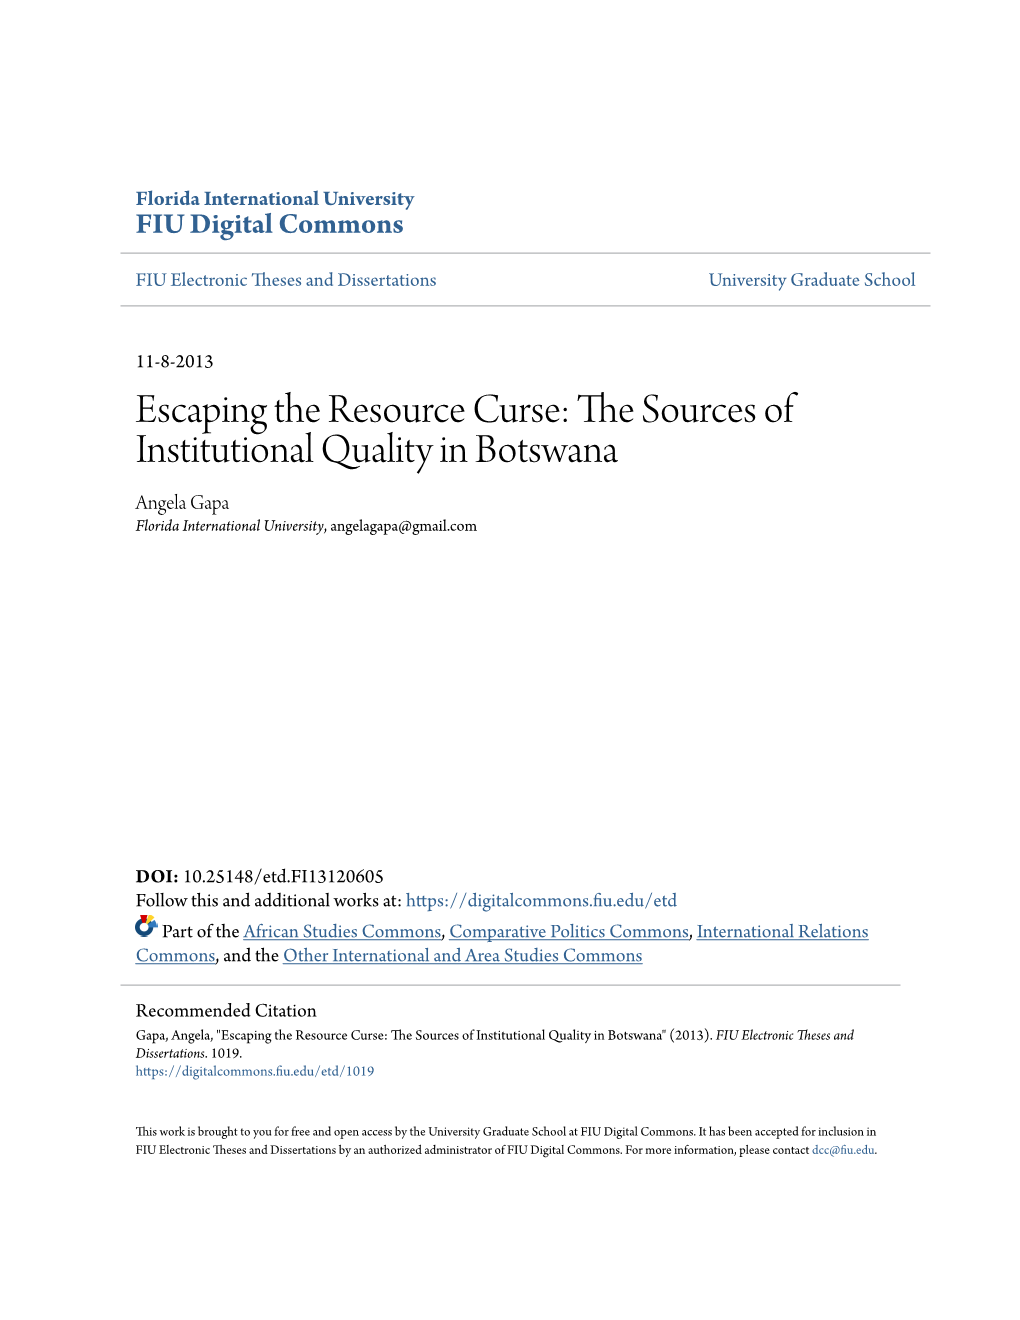 Escaping the Resource Curse: the Sources of Institutional Quality In